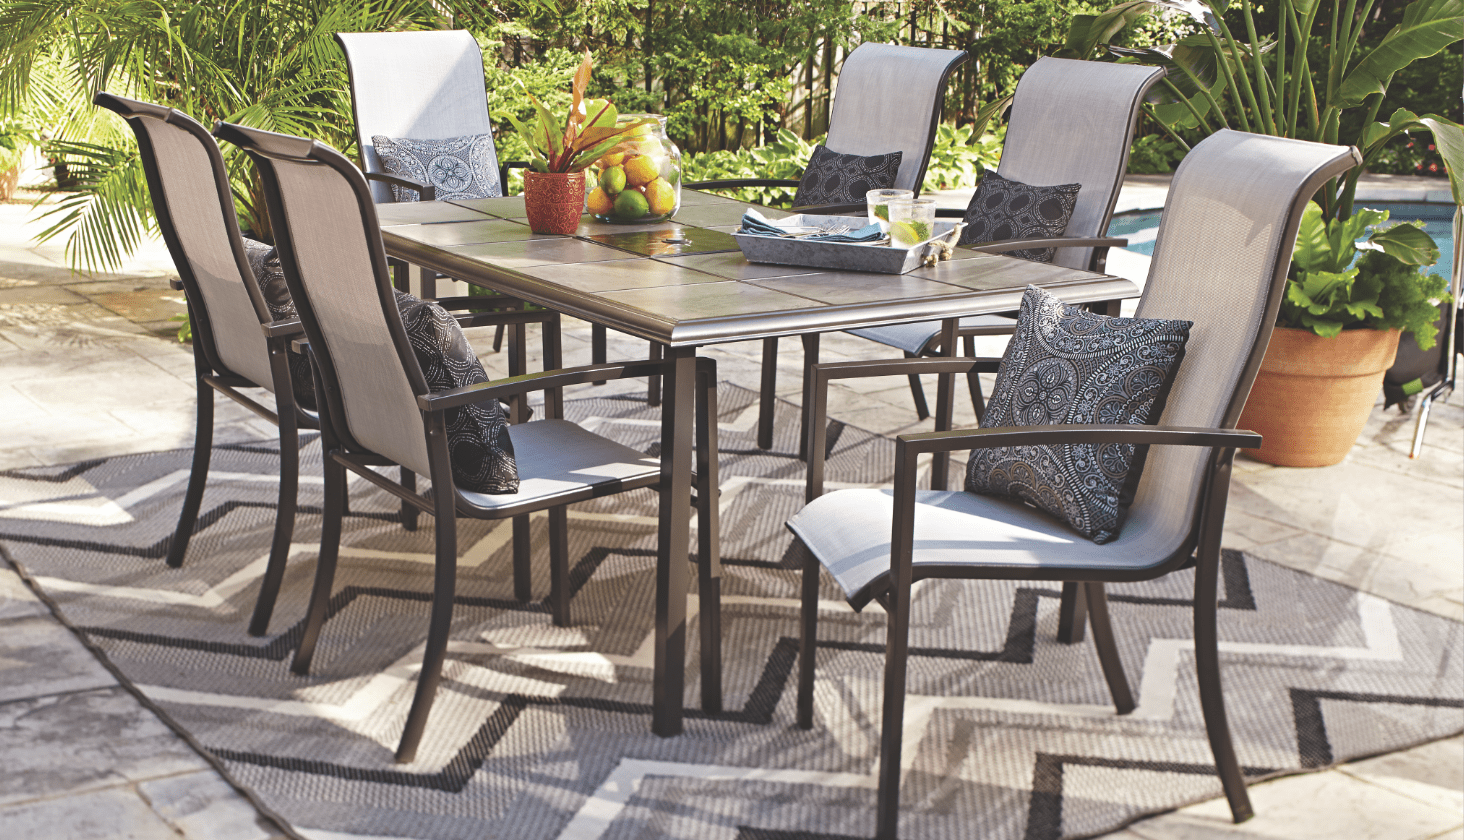 A For Living Bluebay Steel Table with 6 Bluebay Sling Dining Chairs and an outdoor rug on a patio.